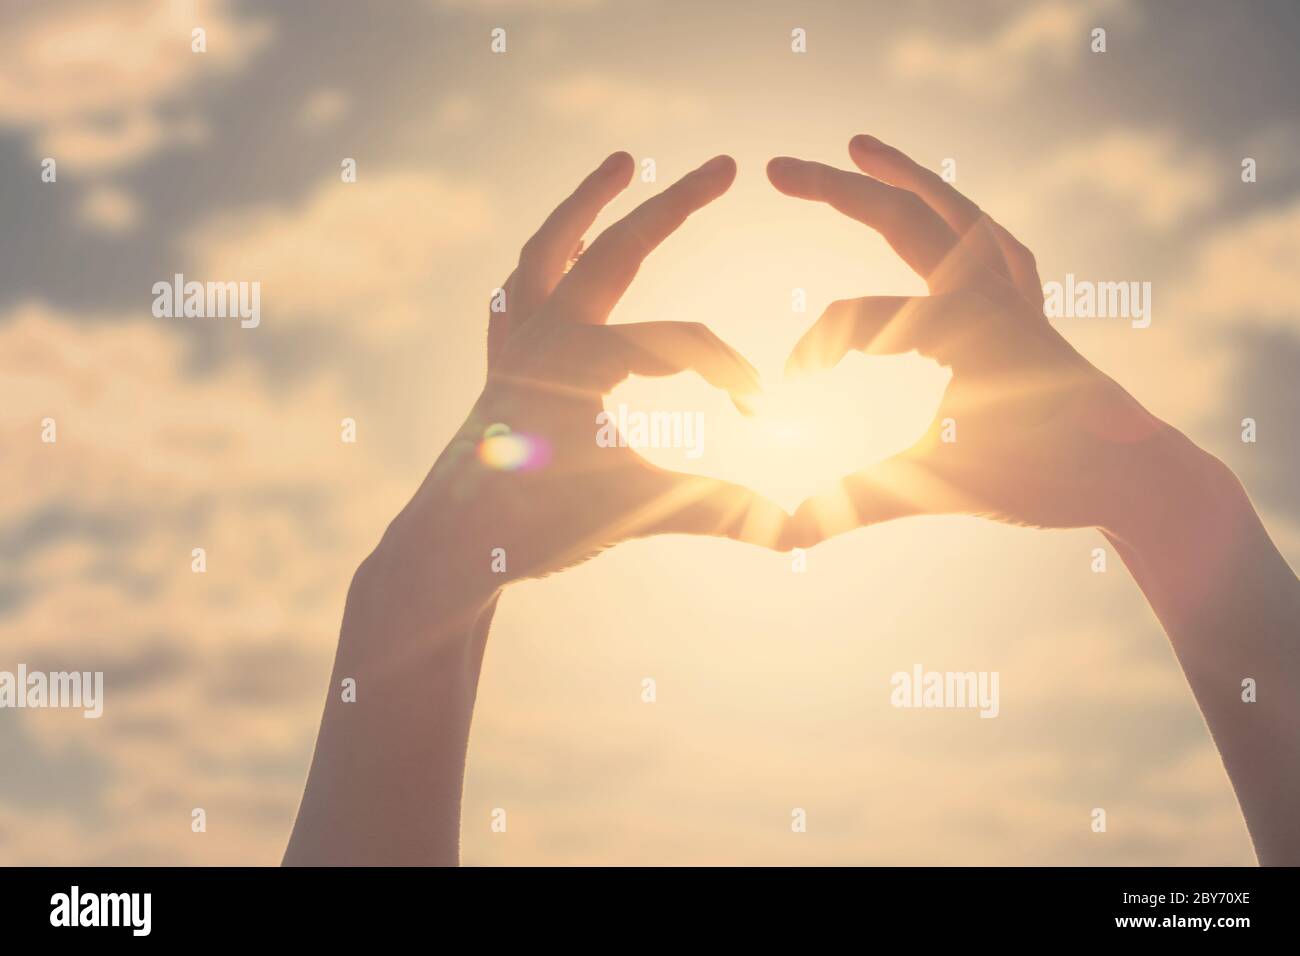 Hand heart shape silhouette made against the sun and sky of a sunrise or sunset. Freedom and love concept. Stock Photo